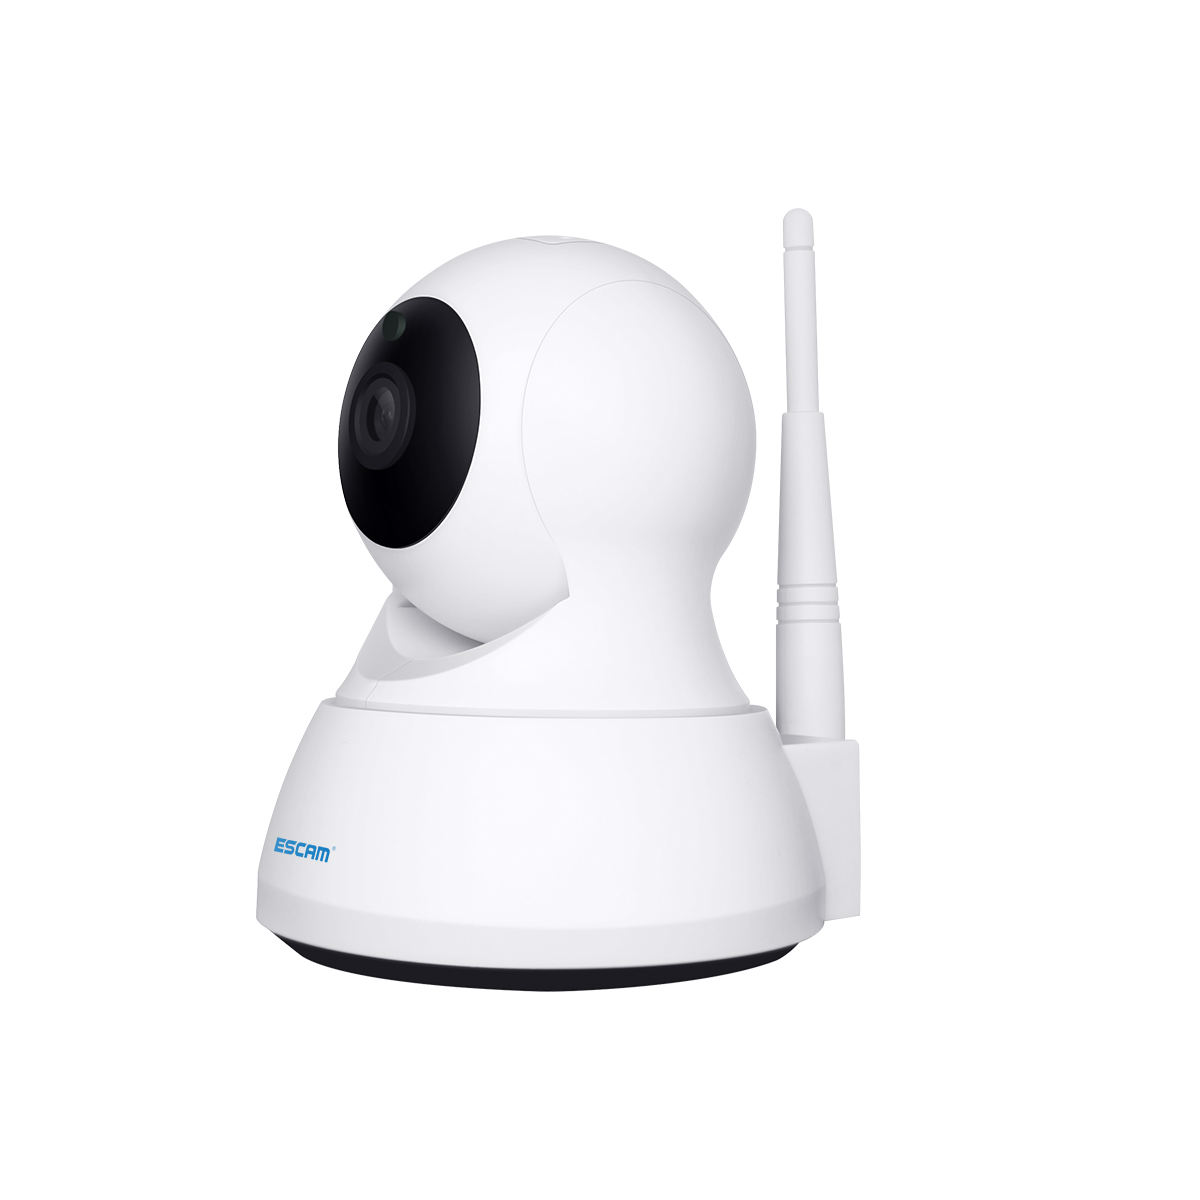 ESCAM QF007 720P 1MP WiFi IP Camera Night Vision Pan Tilt Support Motion Detection 64G TF Card 29